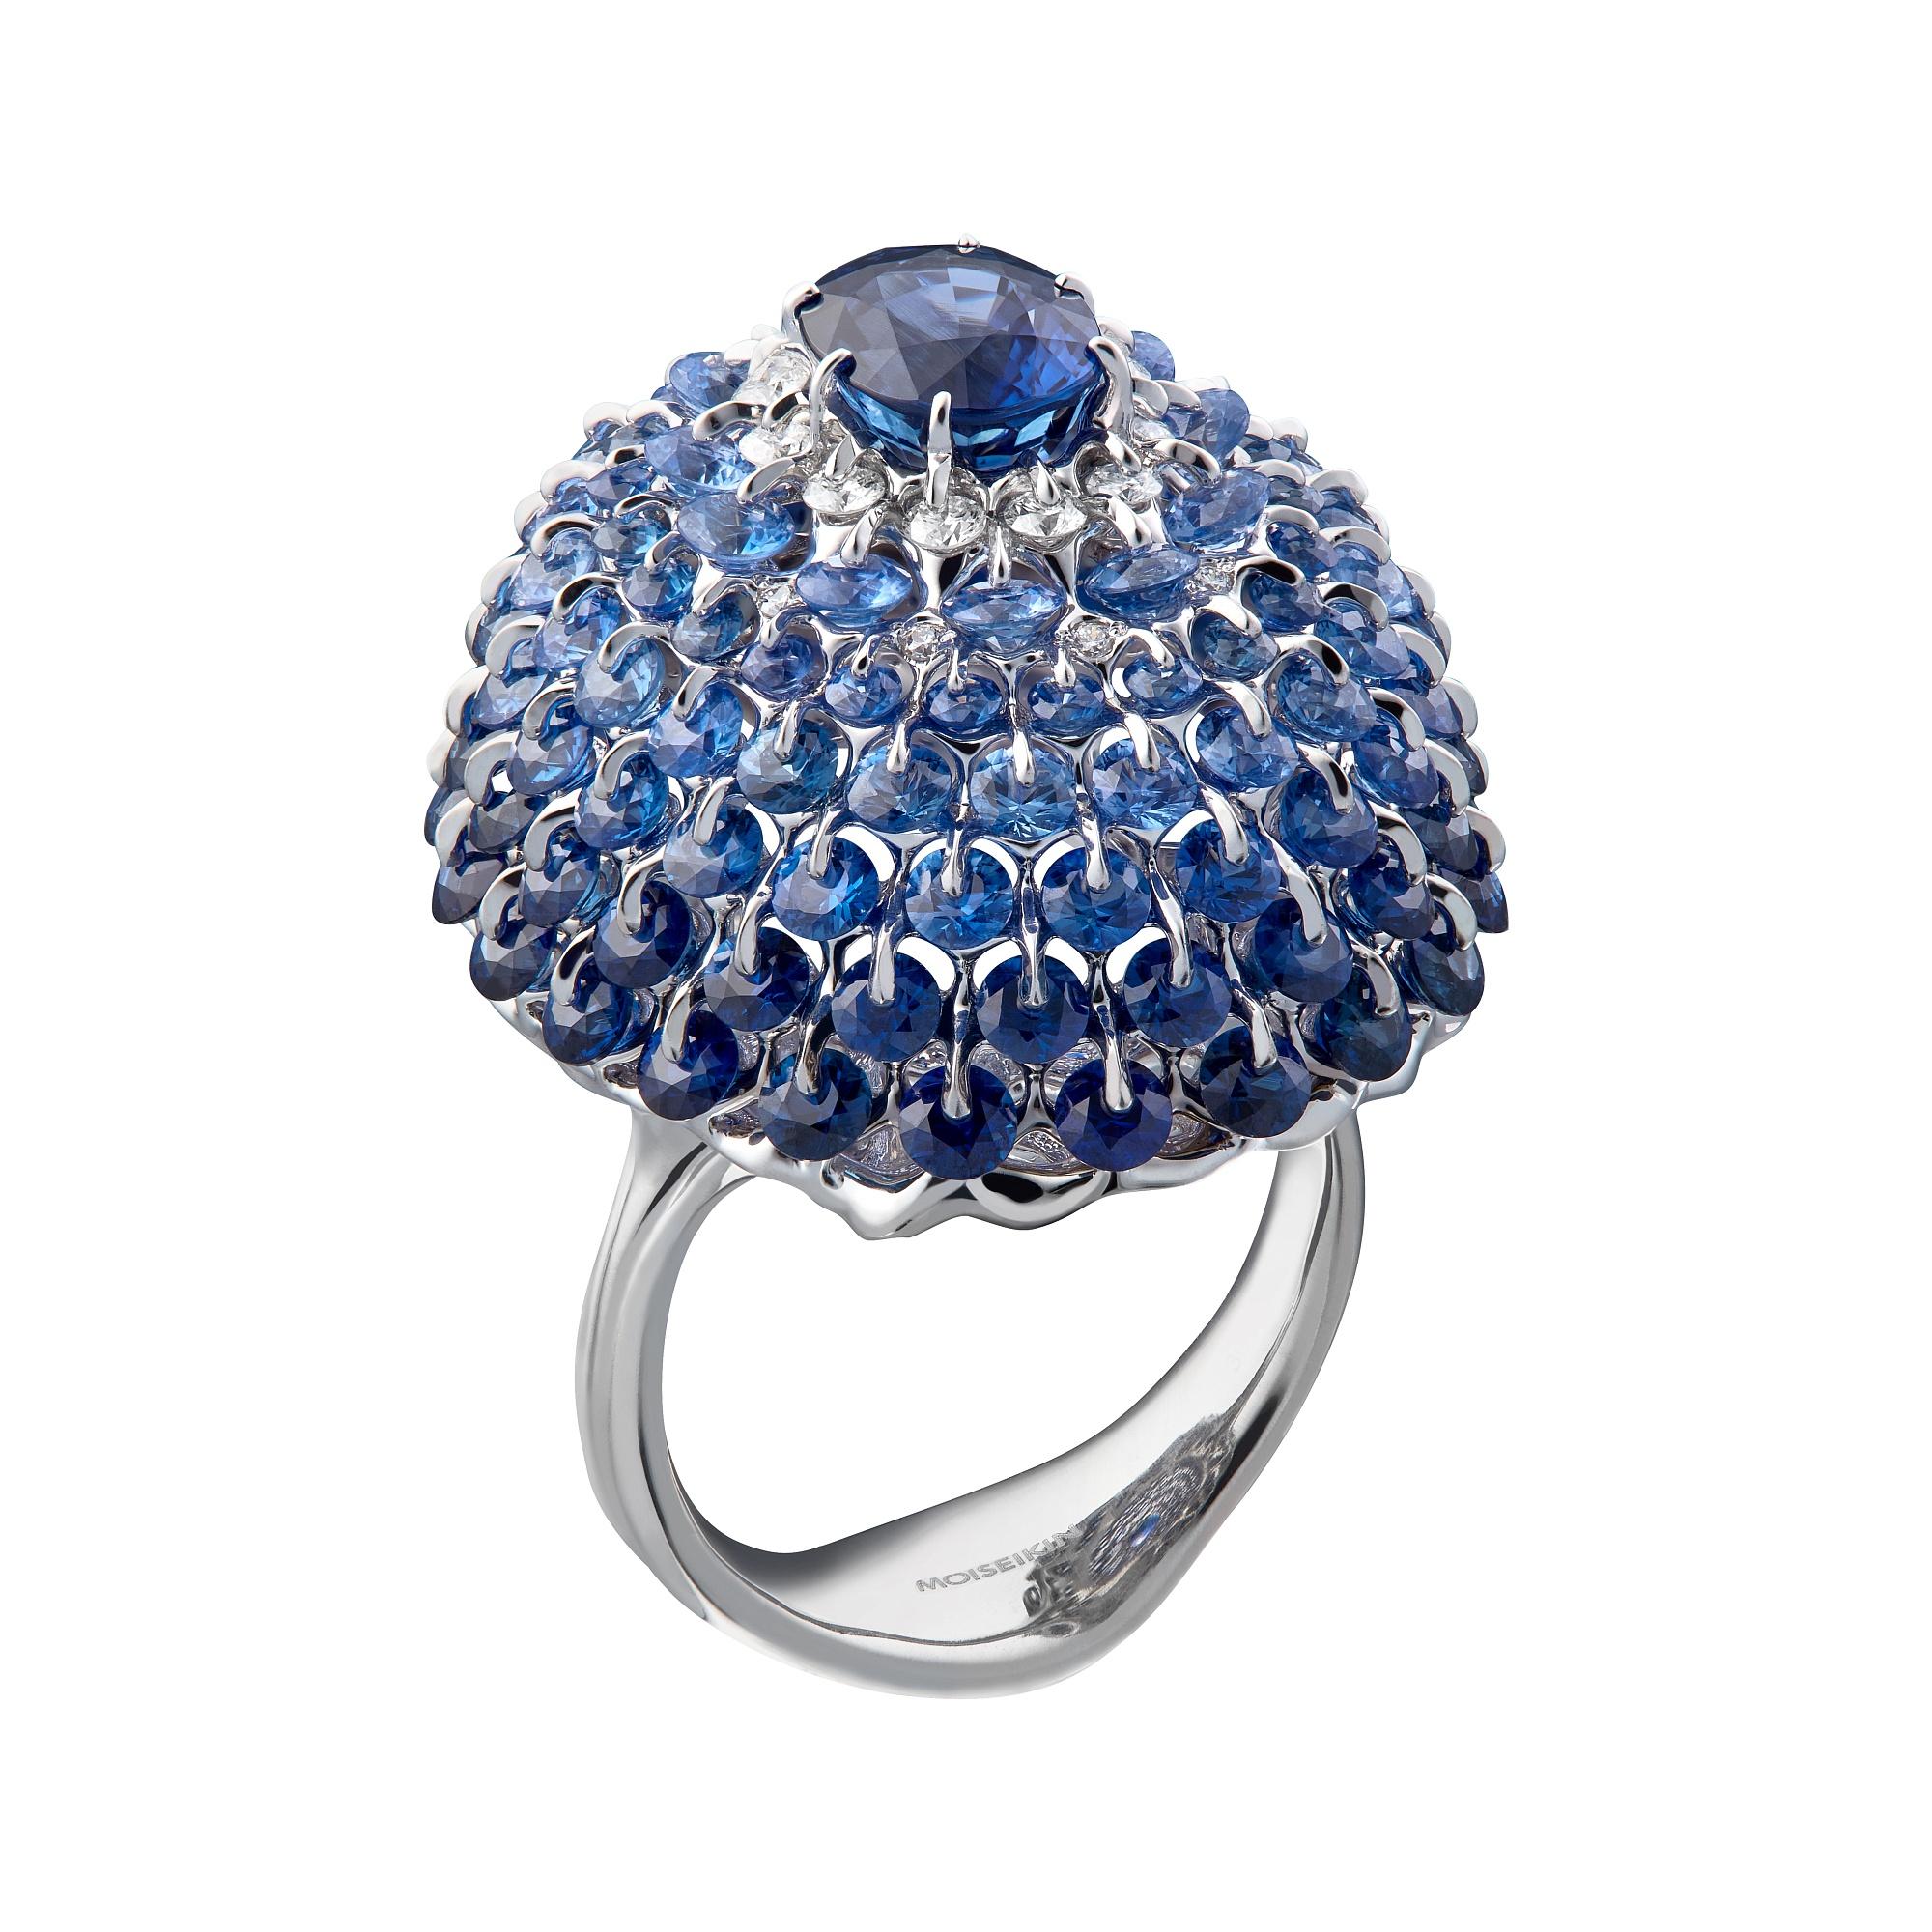 A deep blue No Heat Sapphire 1.95ct is mounted in a state of the art design and technology. 

Internationally patented, Waltzing Brilliance🄬 technology is an innovative jewellery invention of MOISEIKIN since 2013, in which a diamond facet gem